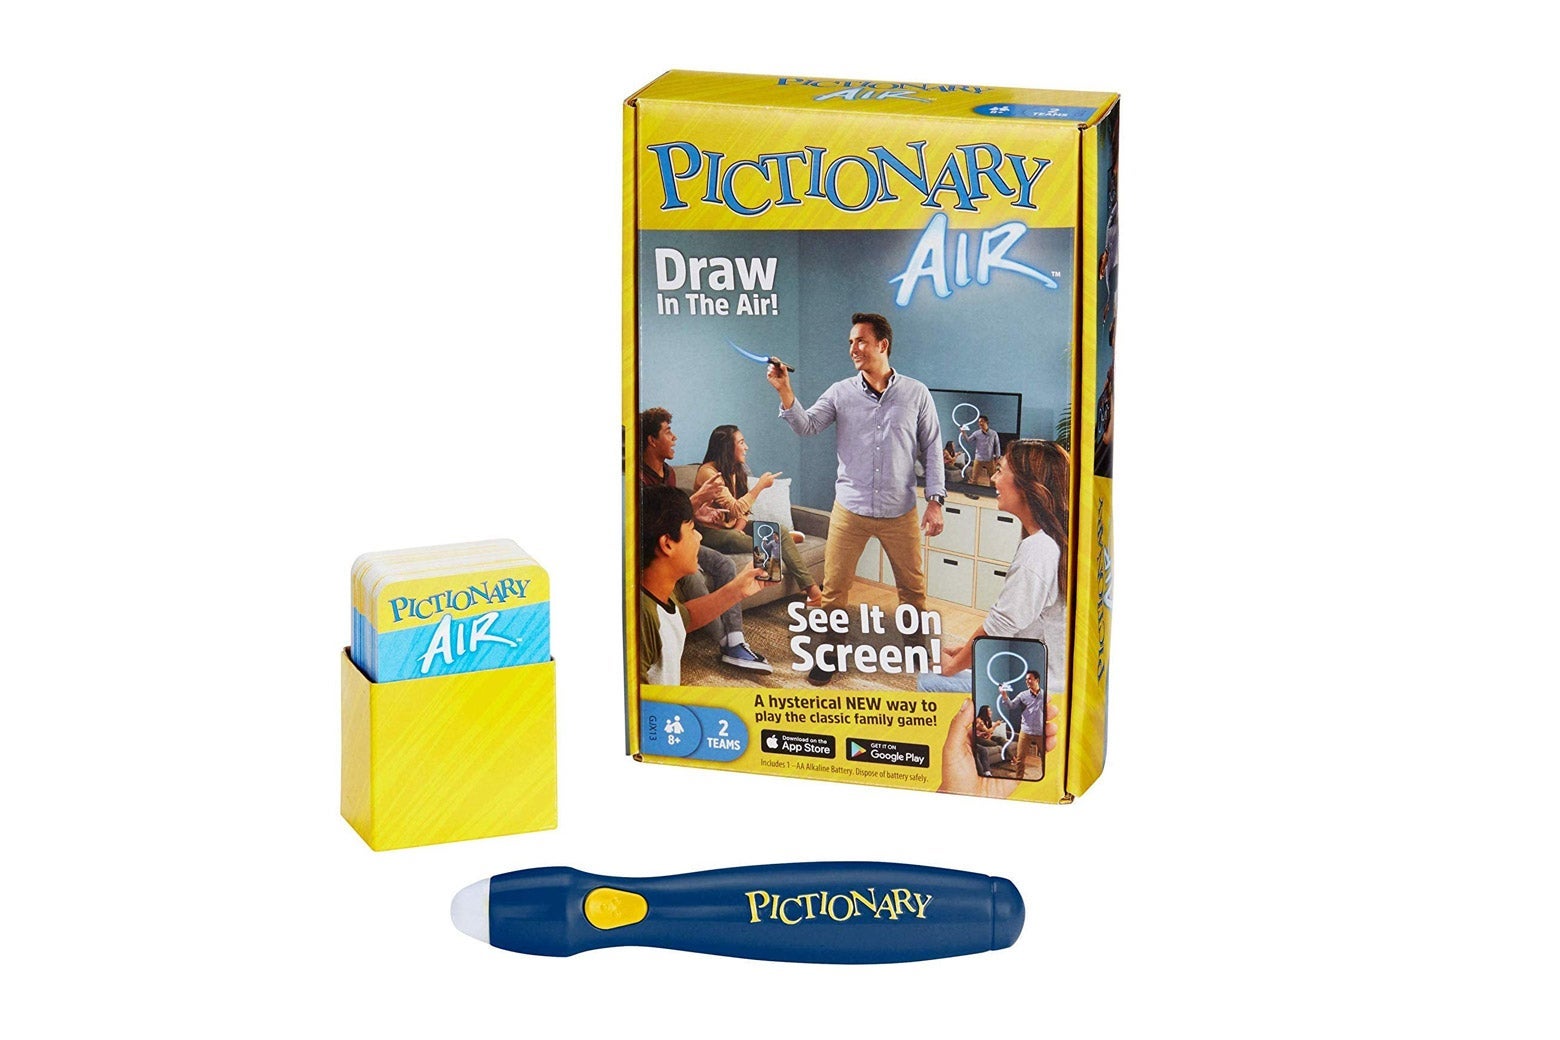 Pictionary Air.